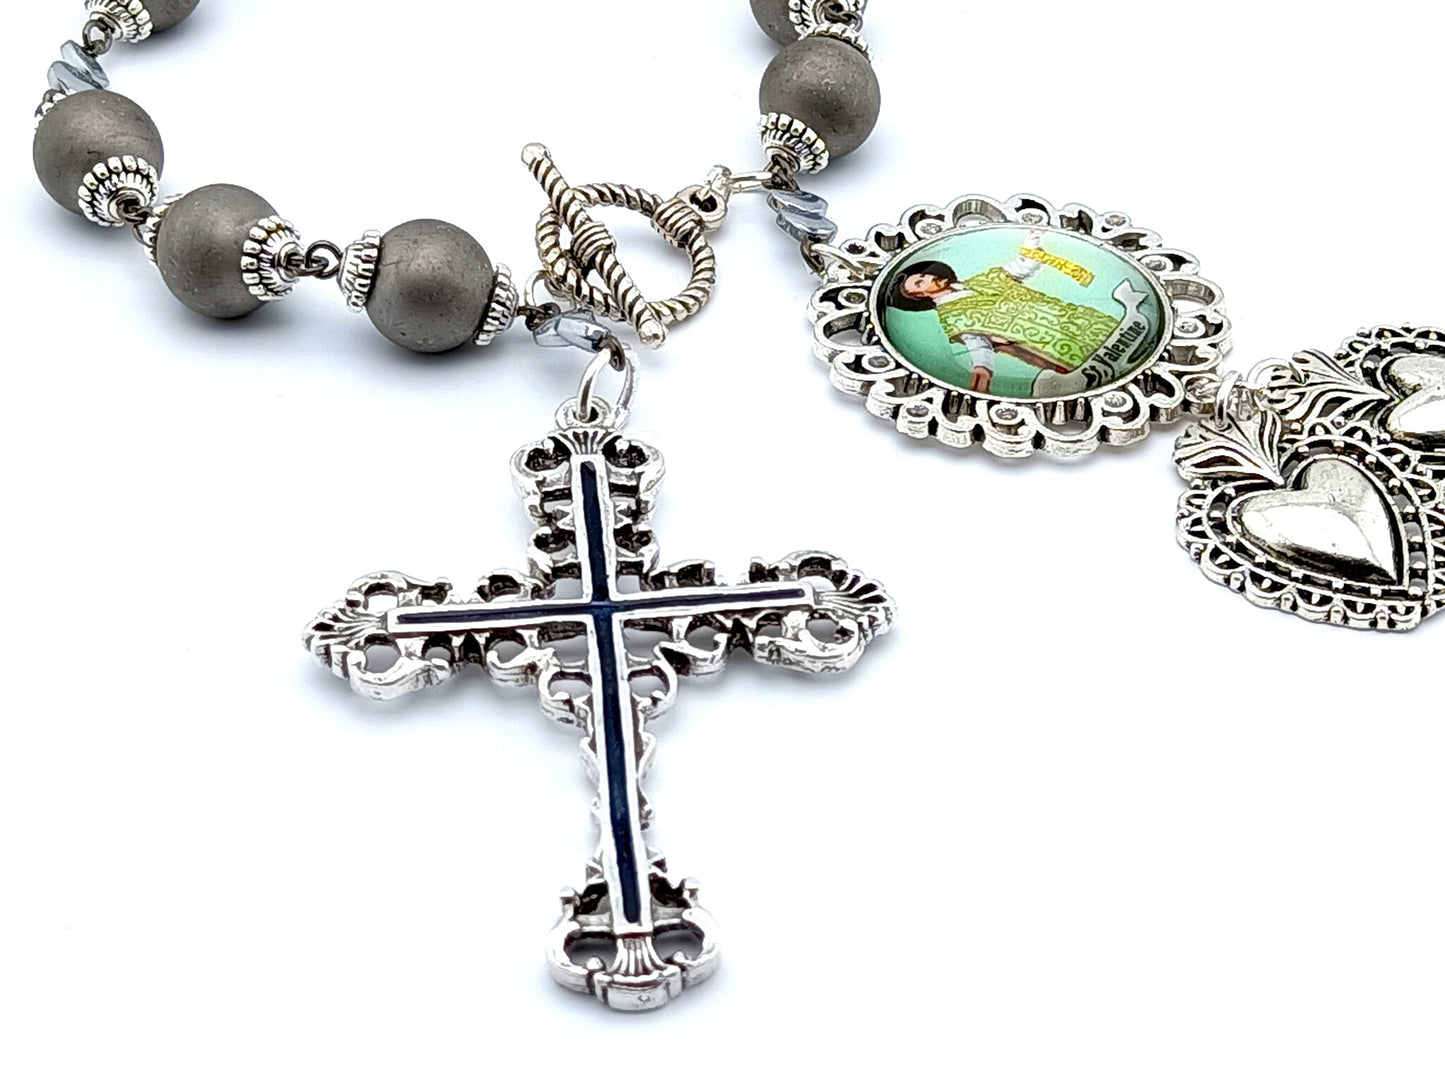 Saint Valentine unique rosary beads prayer chaplet with silver glass beads, silver cross, picture medal and two hearts medals.